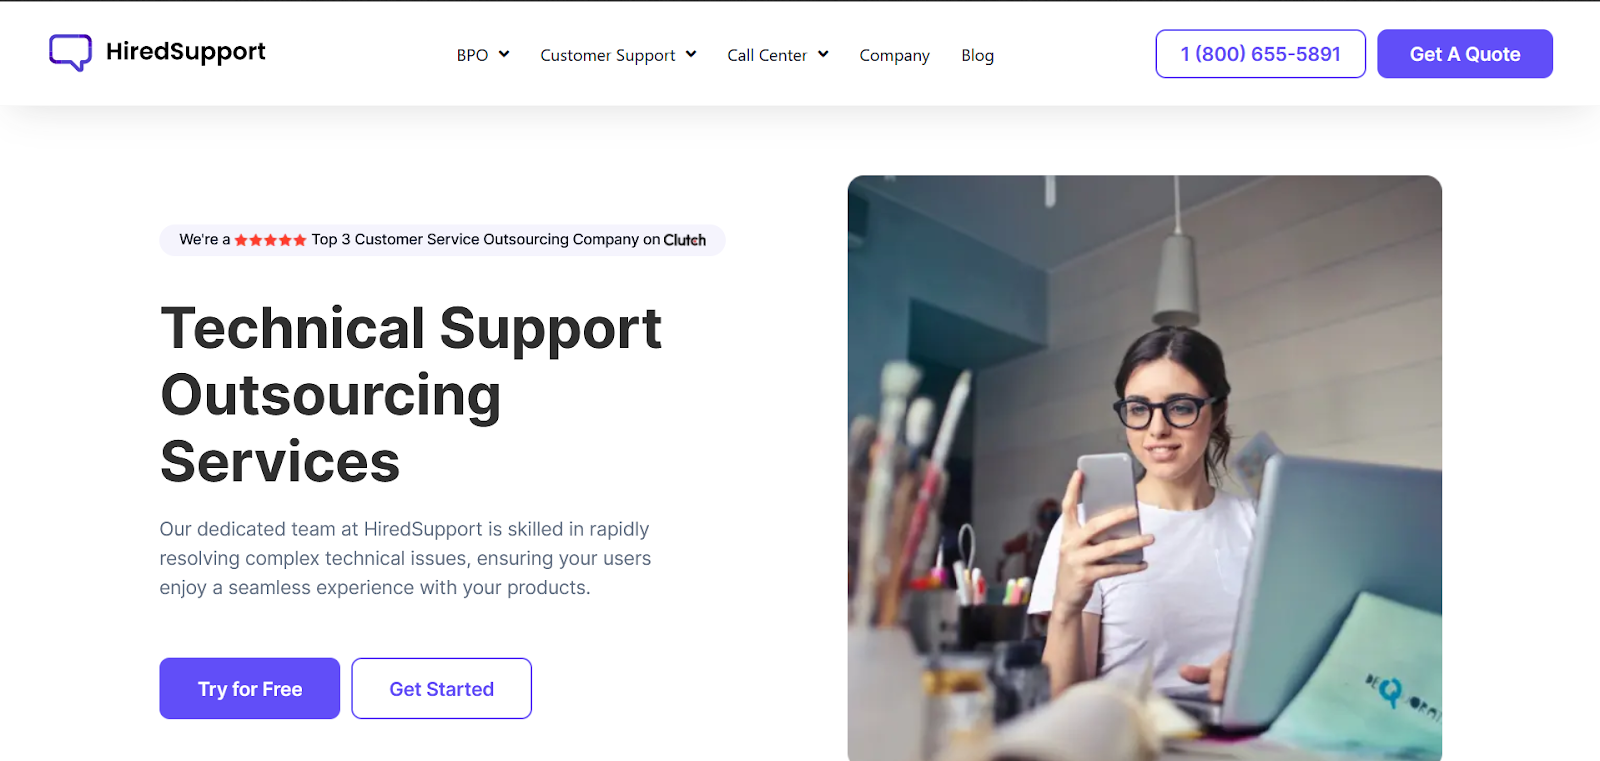 HiredSupport - Top 10 IT Support Companies for Small Business